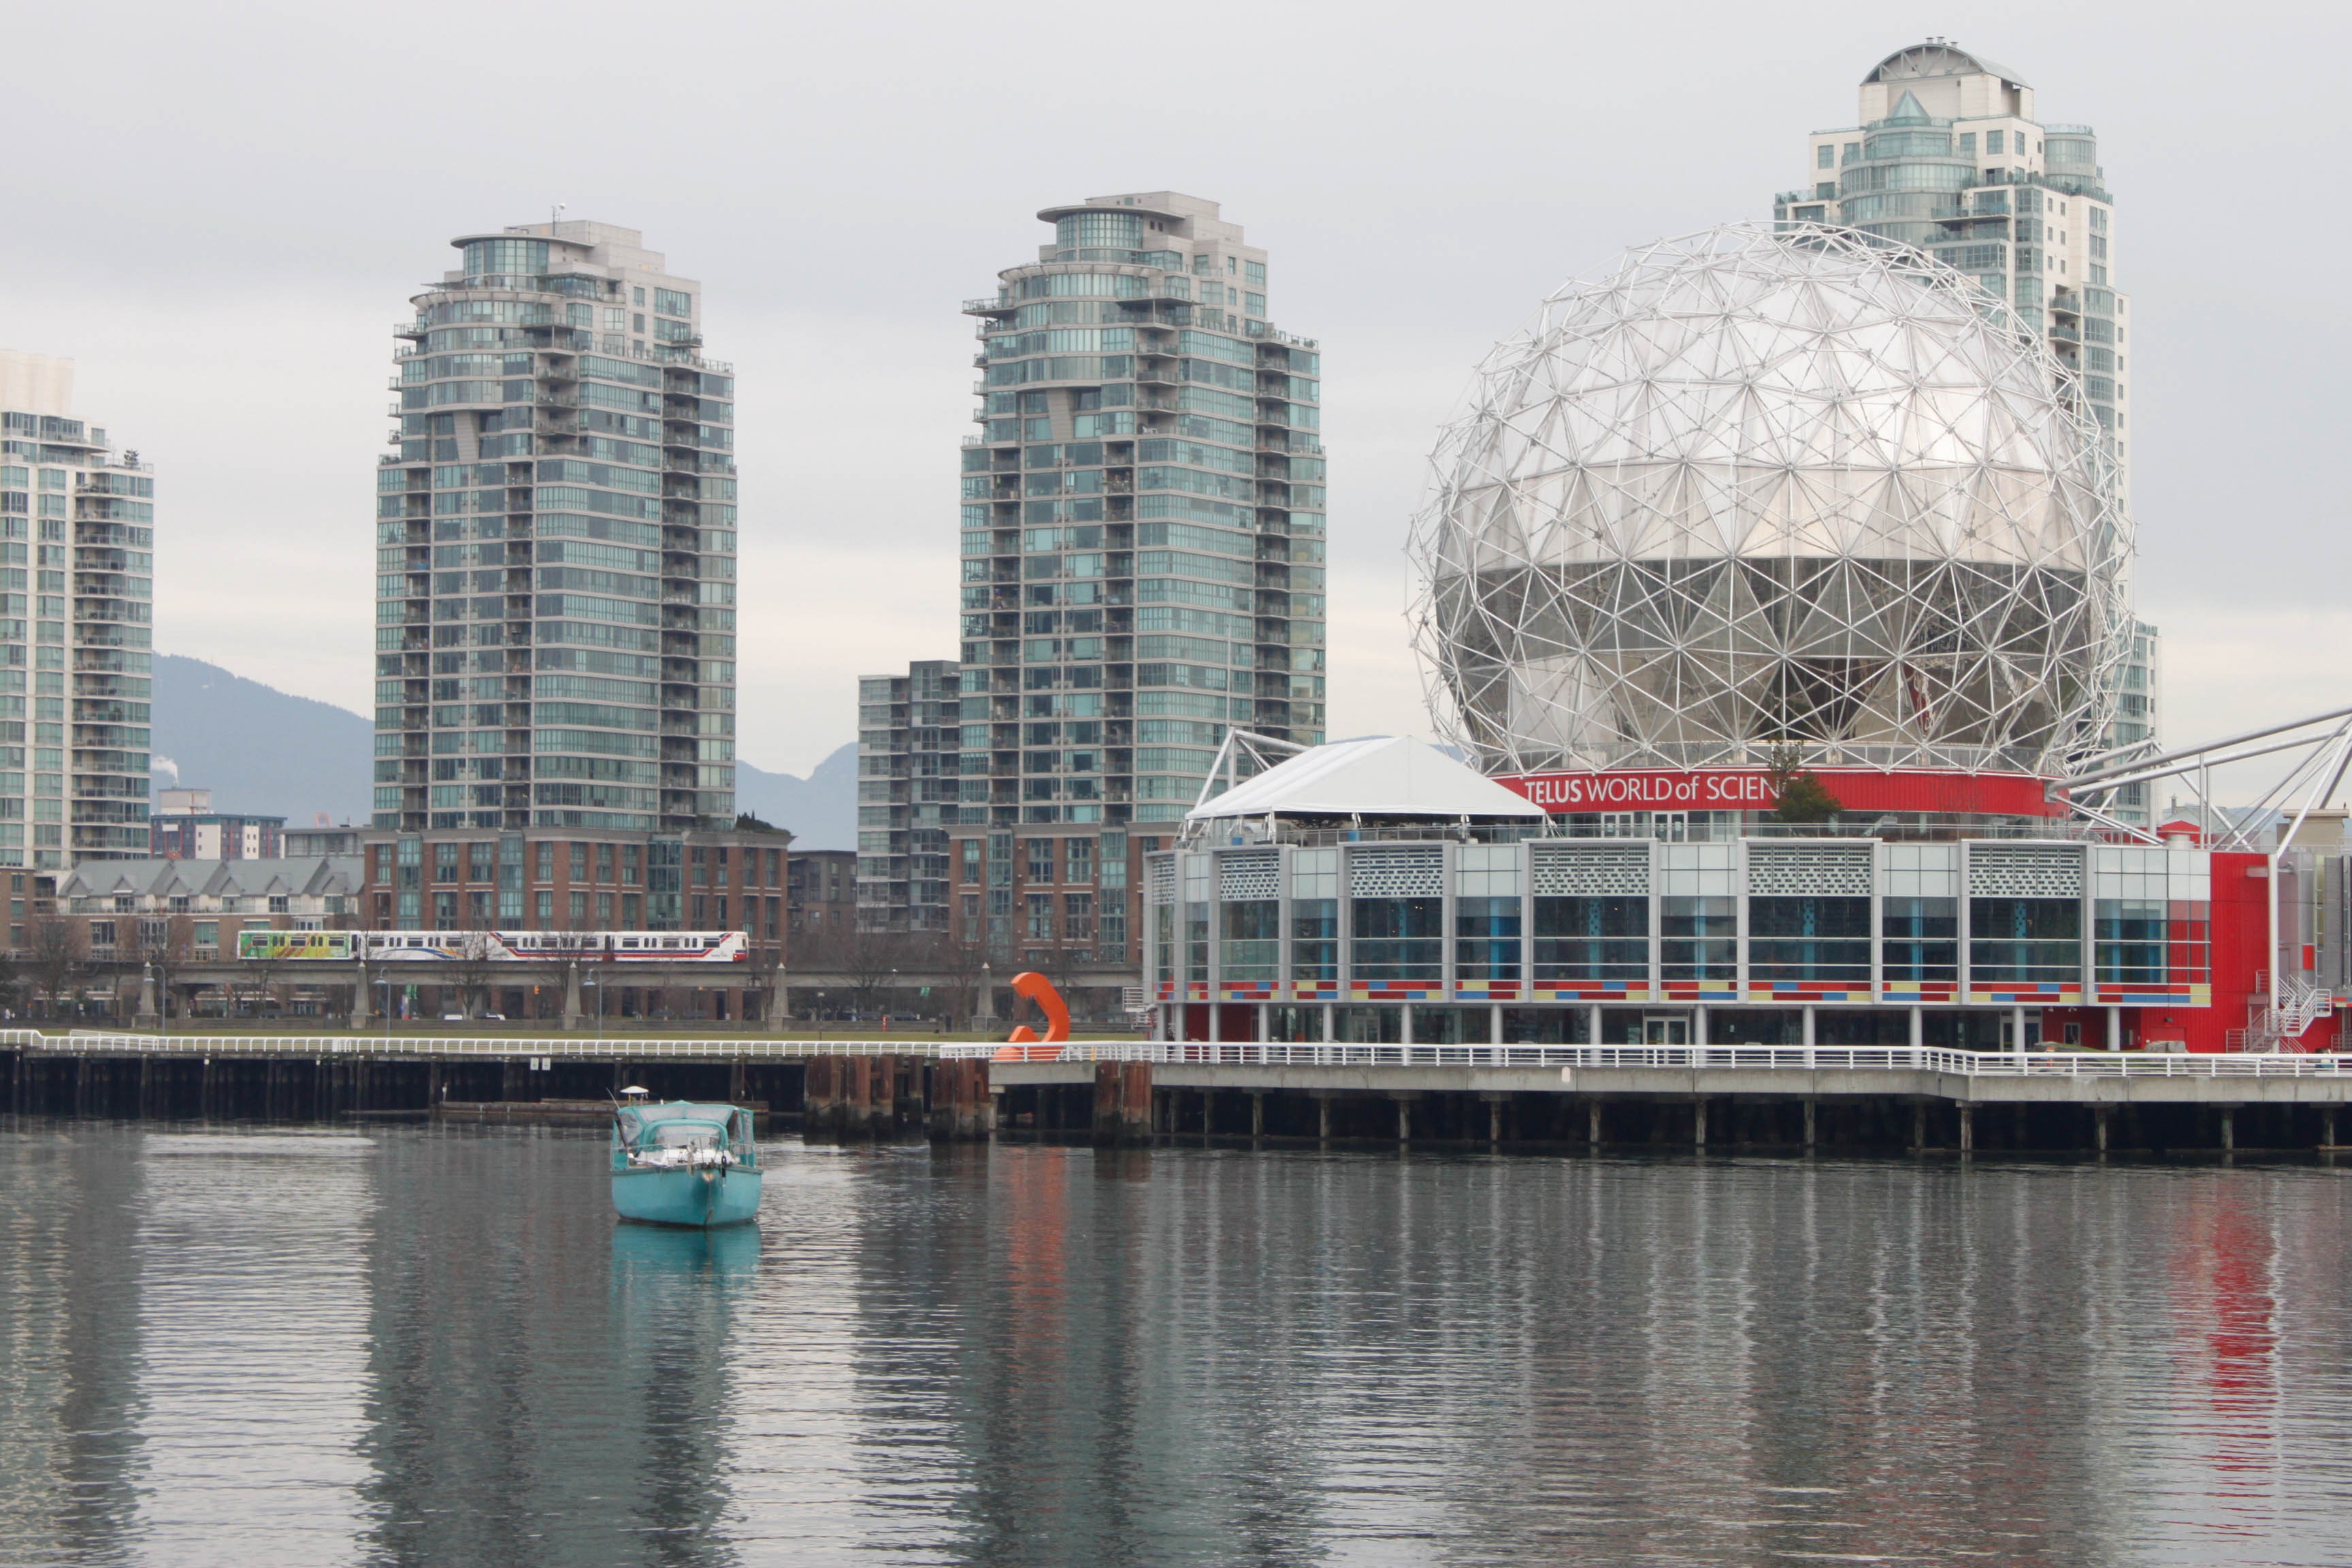 Statistics Canada recently reported that 43 per cent of Metro Vancouver’s population is now of Asian heritage. Some people believe that overseas investment from Asia is pushing up housing prices that are already unaffordable. Photo: AFP